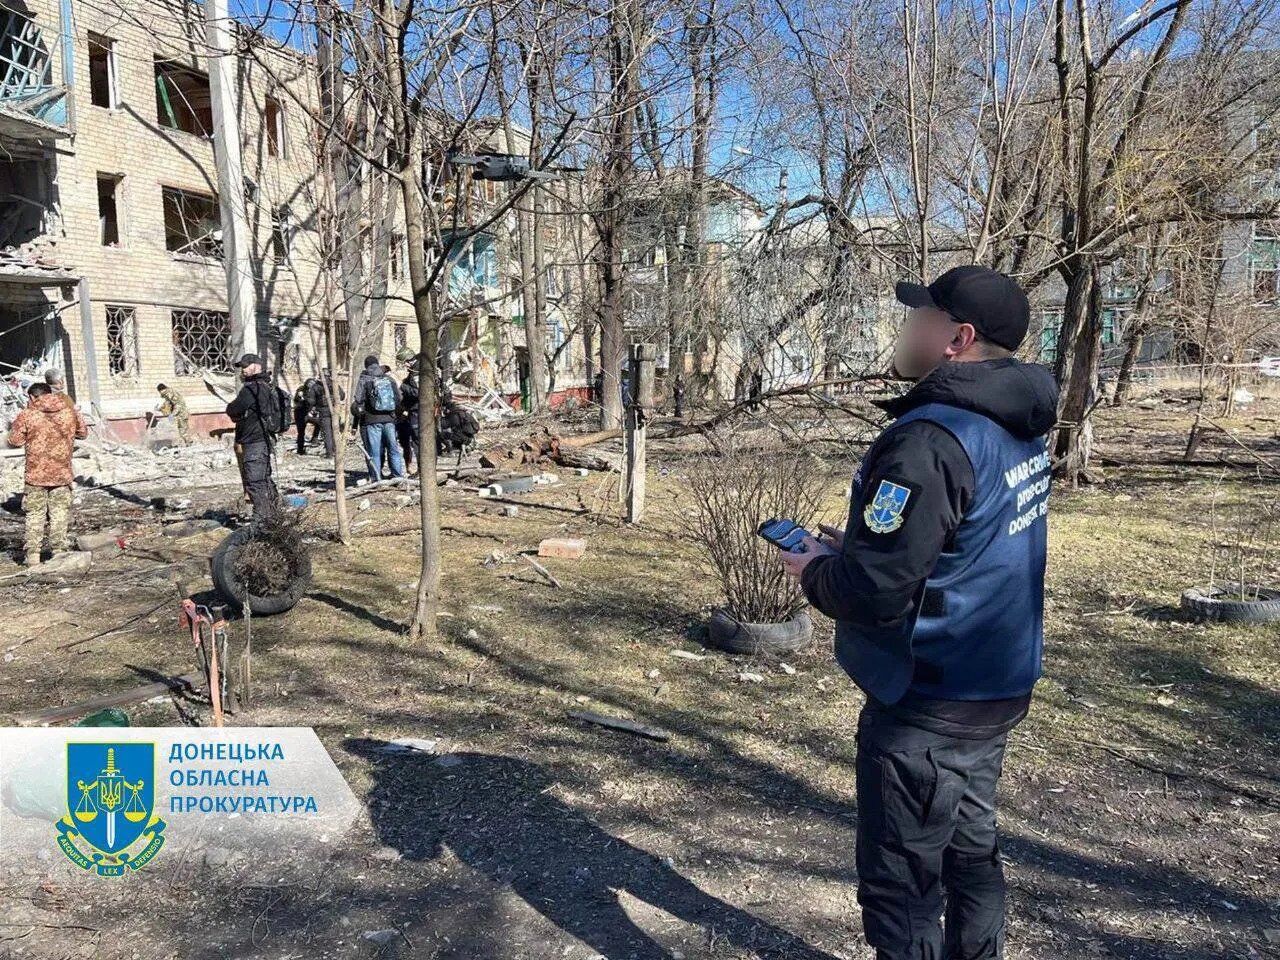 Russian occupiers struck the center of Kramatorsk, damaging houses: one person was killed and one wounded. Photos and videos